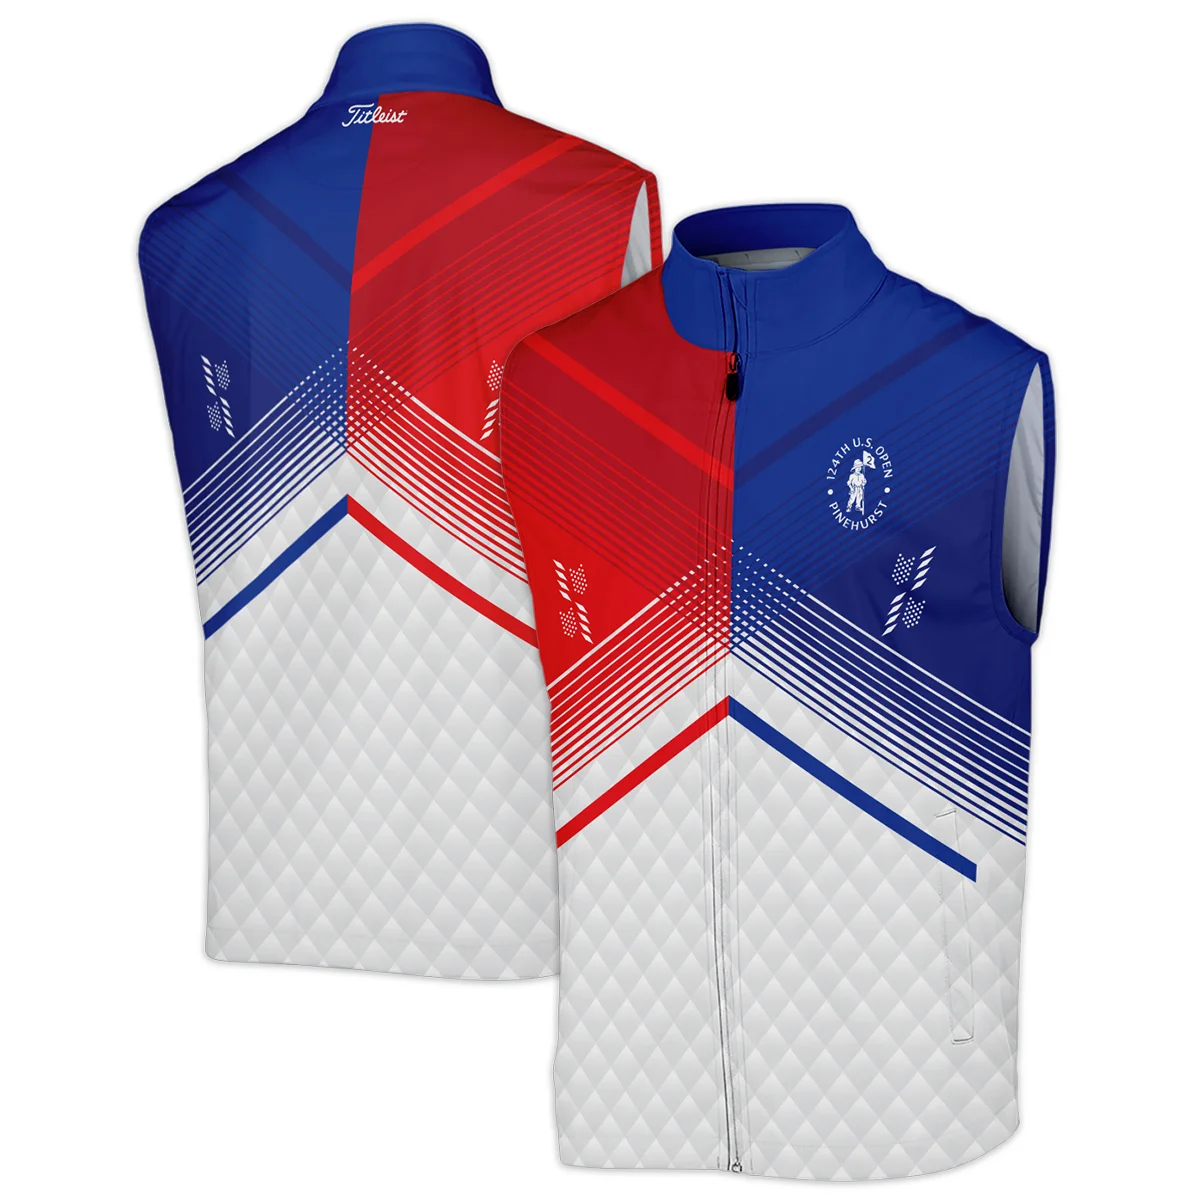 Titleist 124th U.S. Open Pinehurst Blue Red Line White Abstract Hoodie Shirt Style Classic